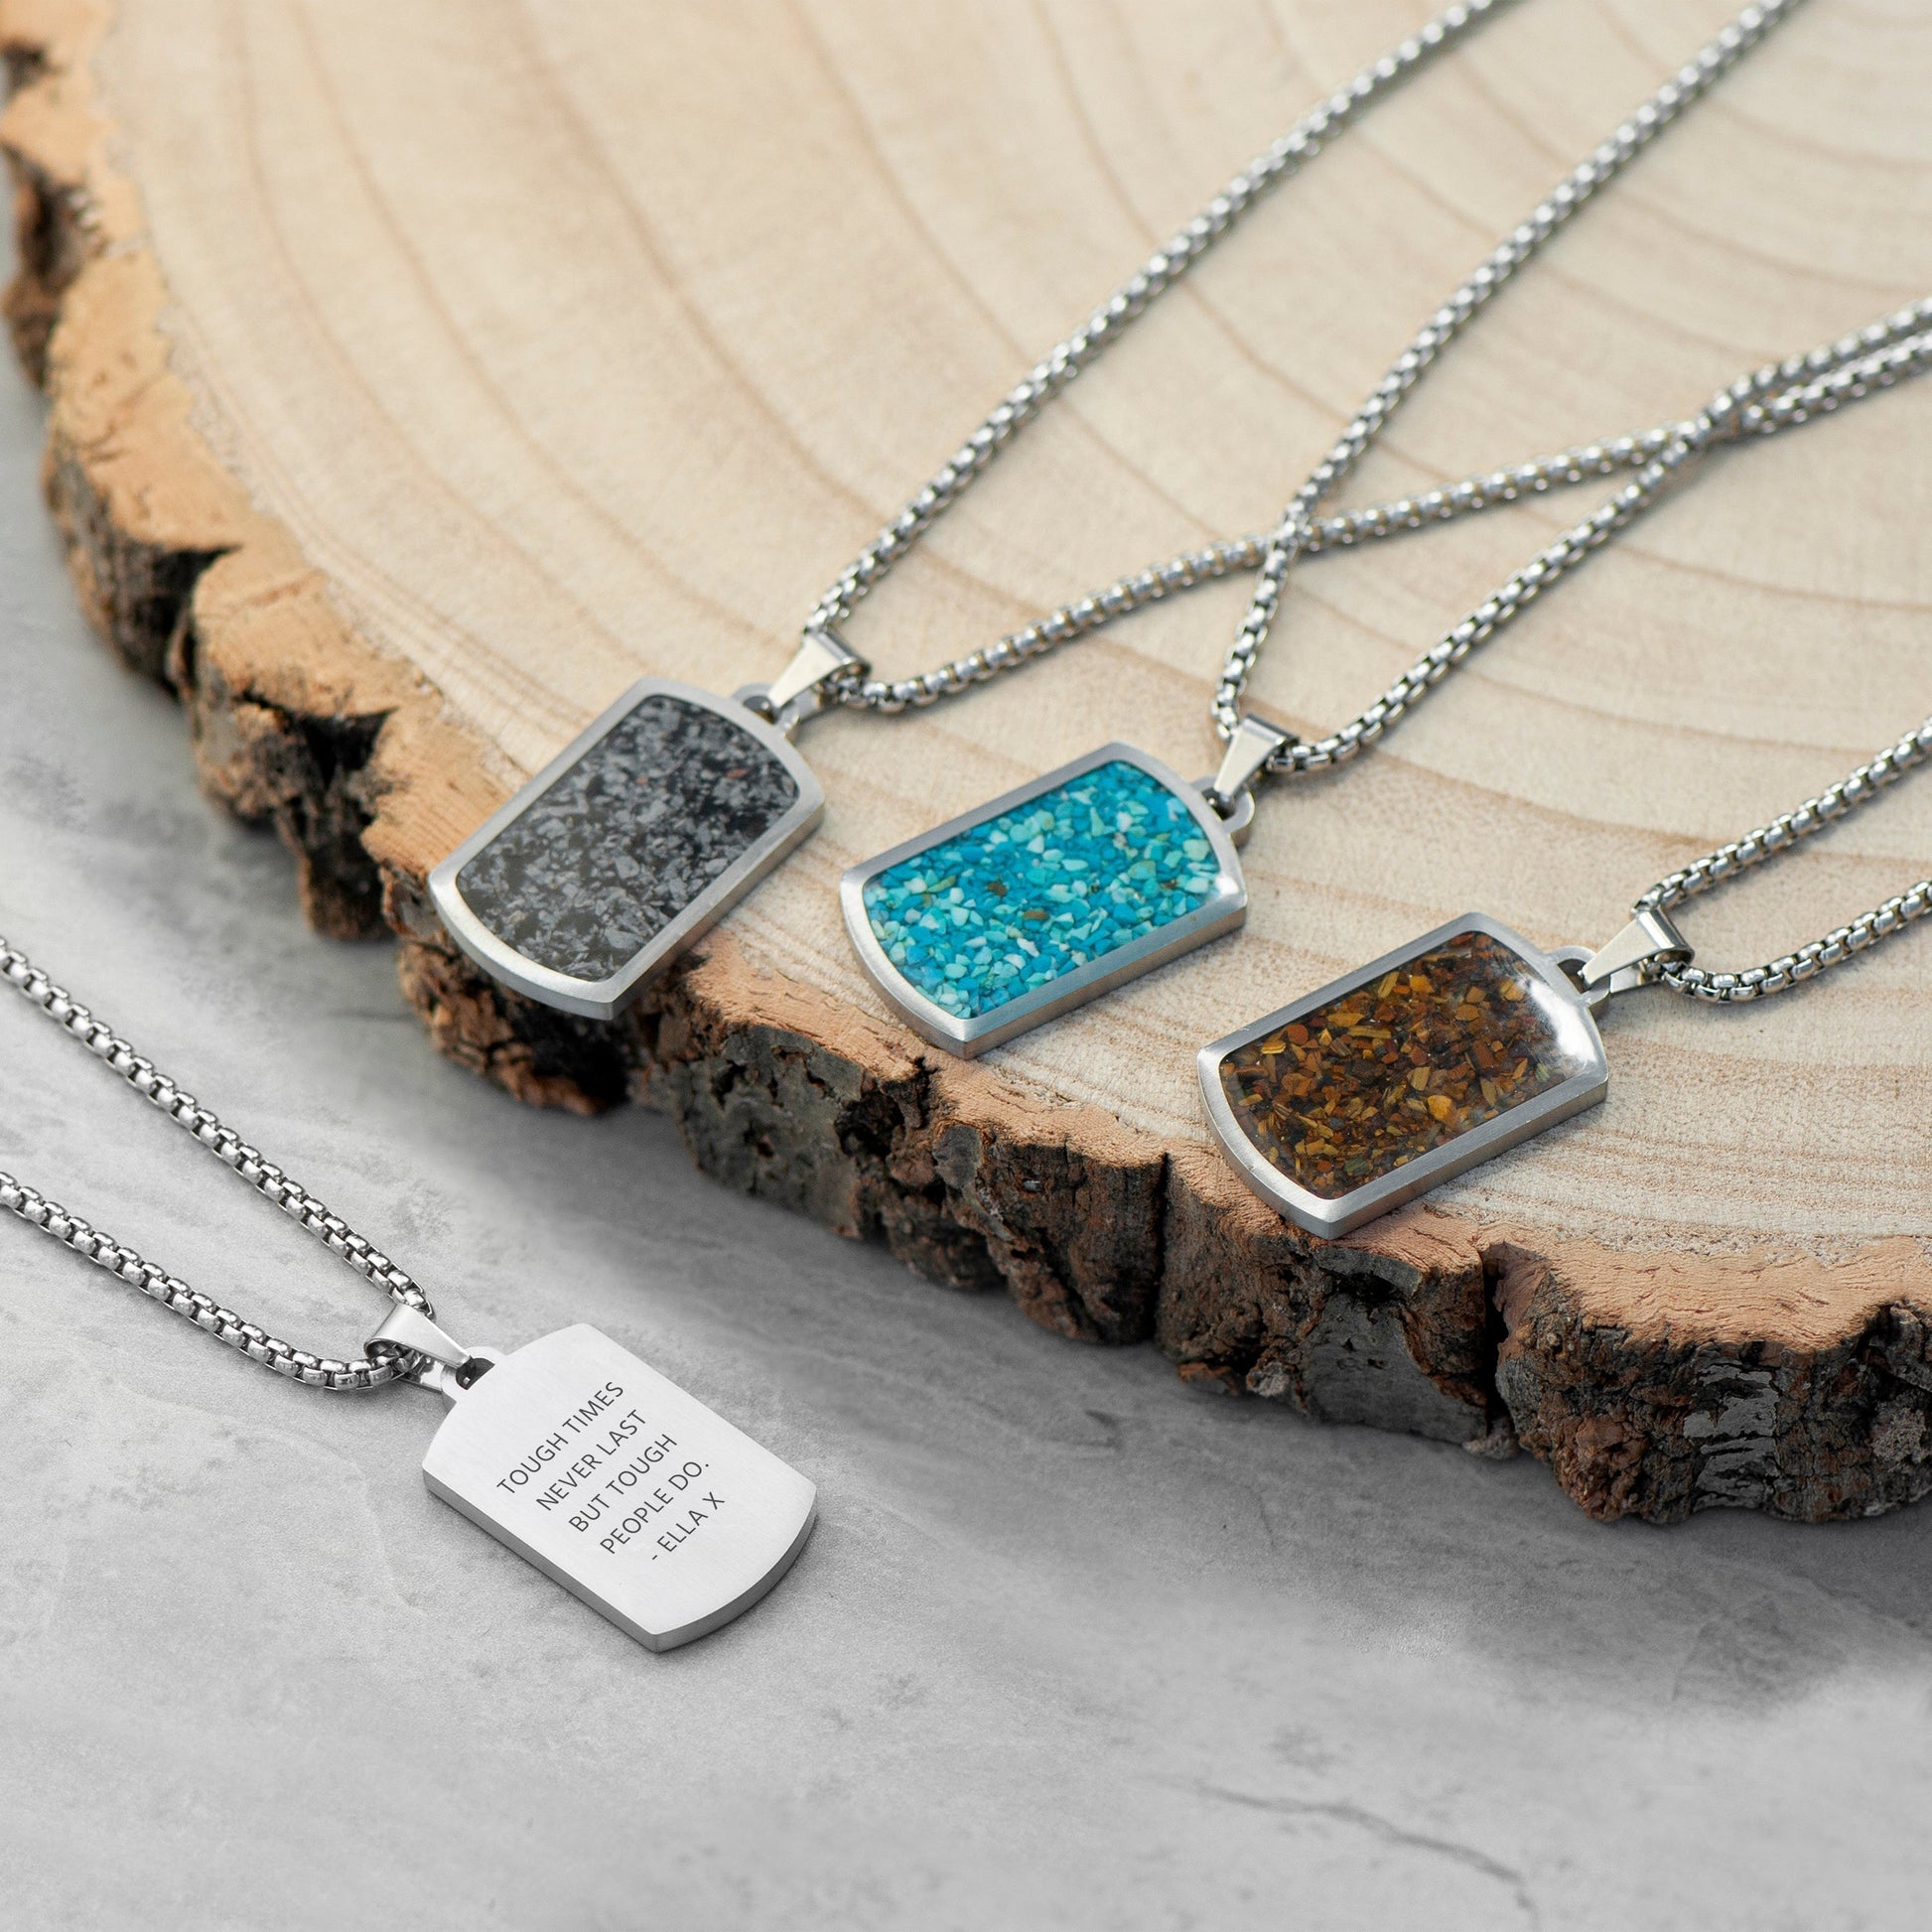 Personalized men's necklaces - Personalized Men's Blue Turquoise Dog Tag Necklace 